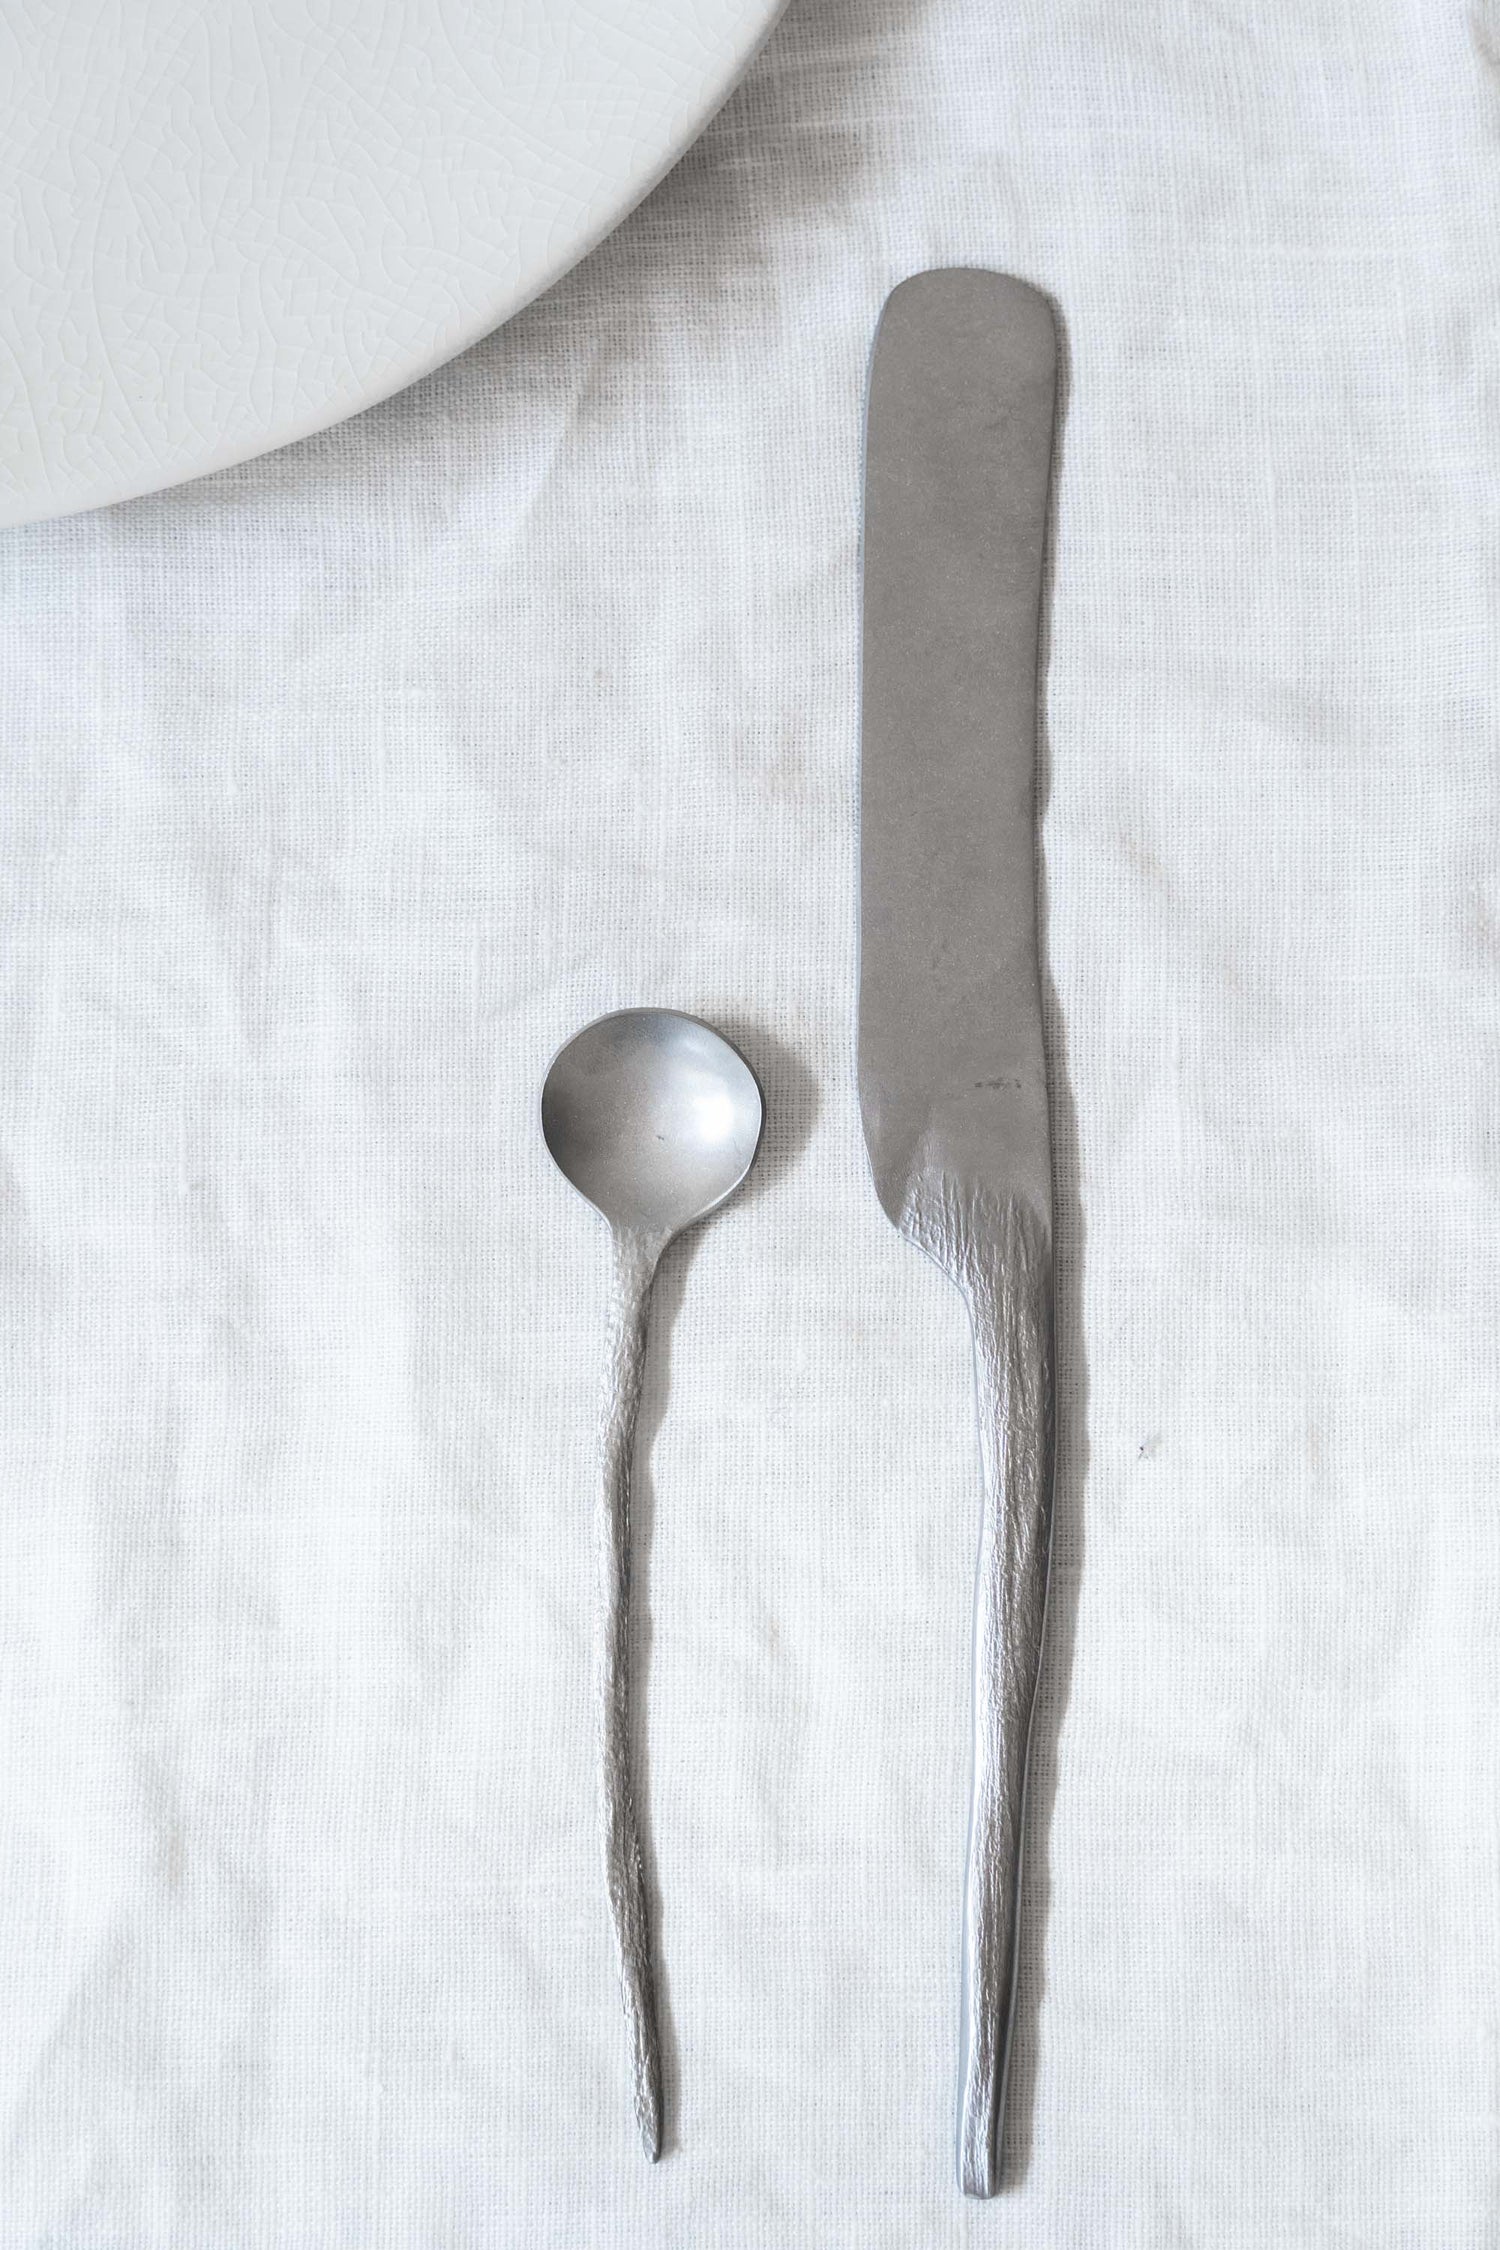 Dessert Spoon and Table Knife from the Flora Vulgaris Cutlery Collection by Serax.